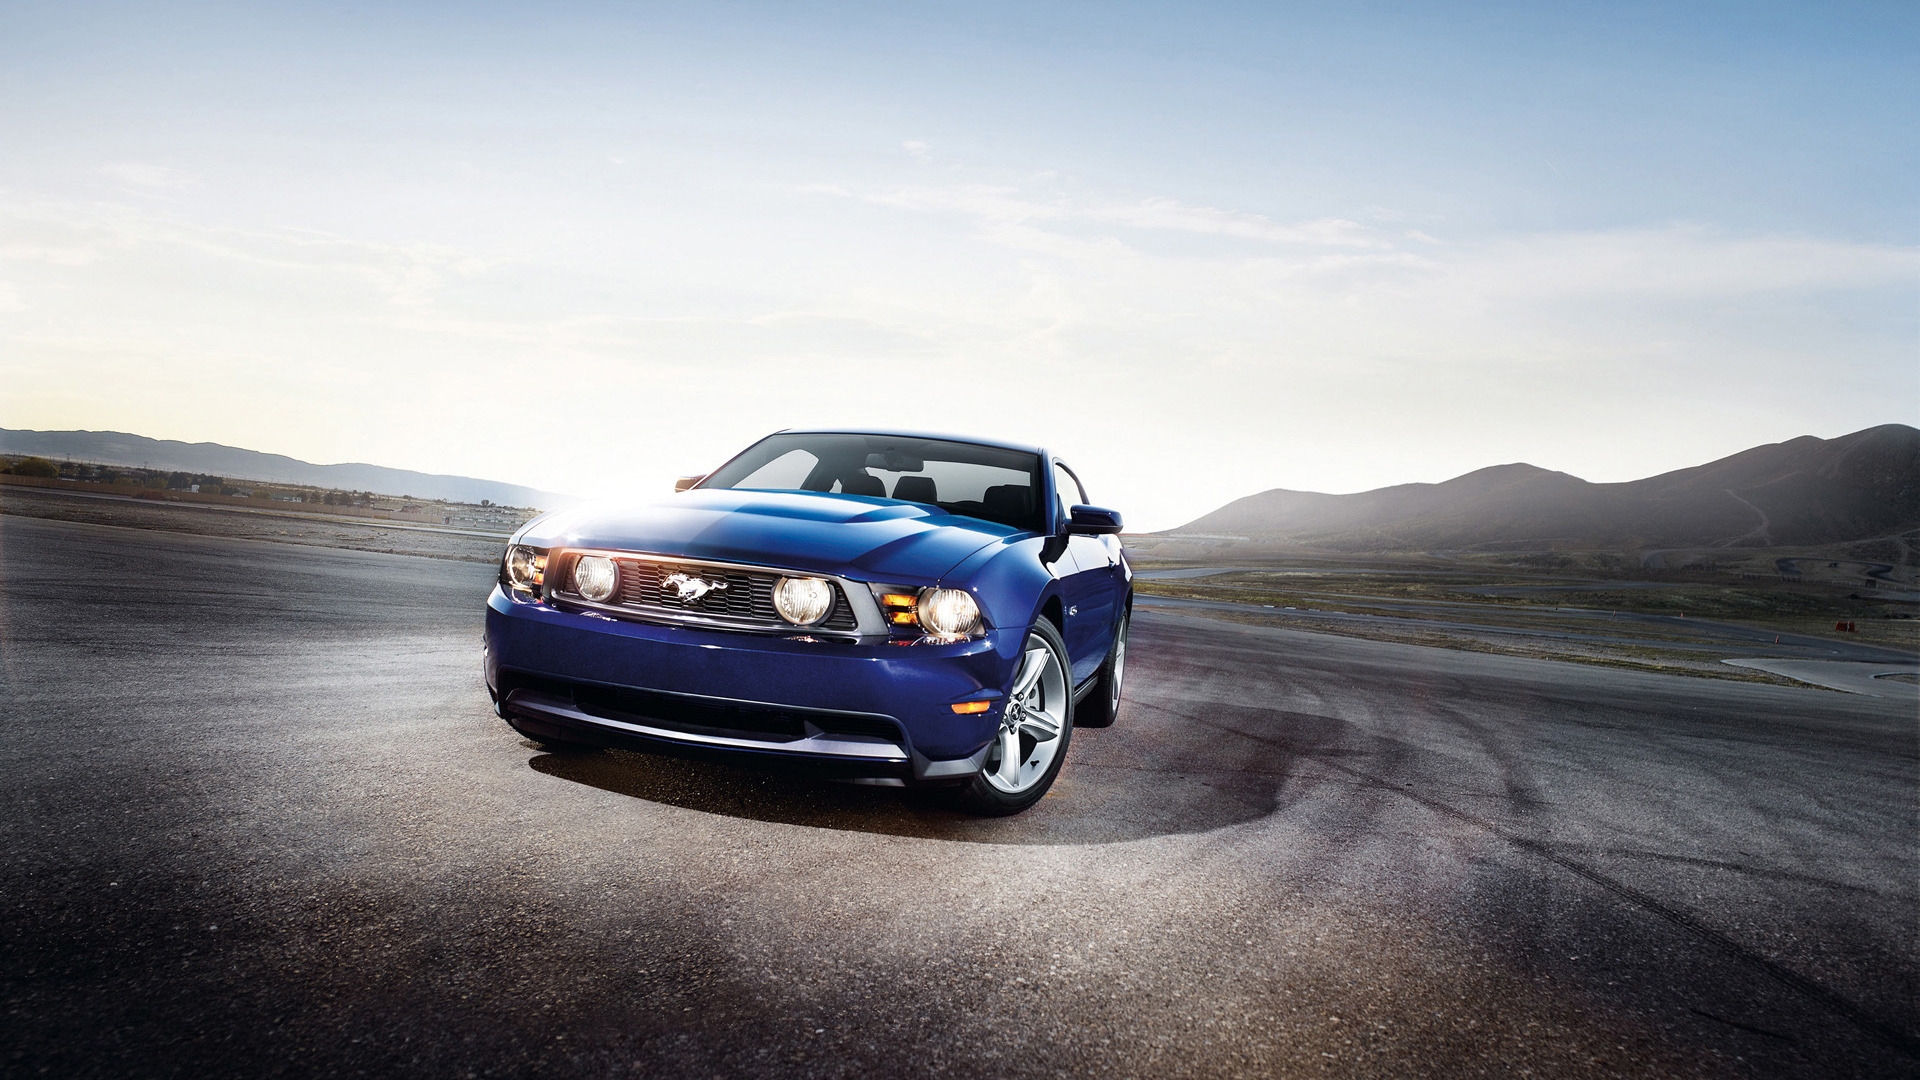 Ford Mustang GT Blue 2012 for 1920 x 1080 HDTV 1080p resolution